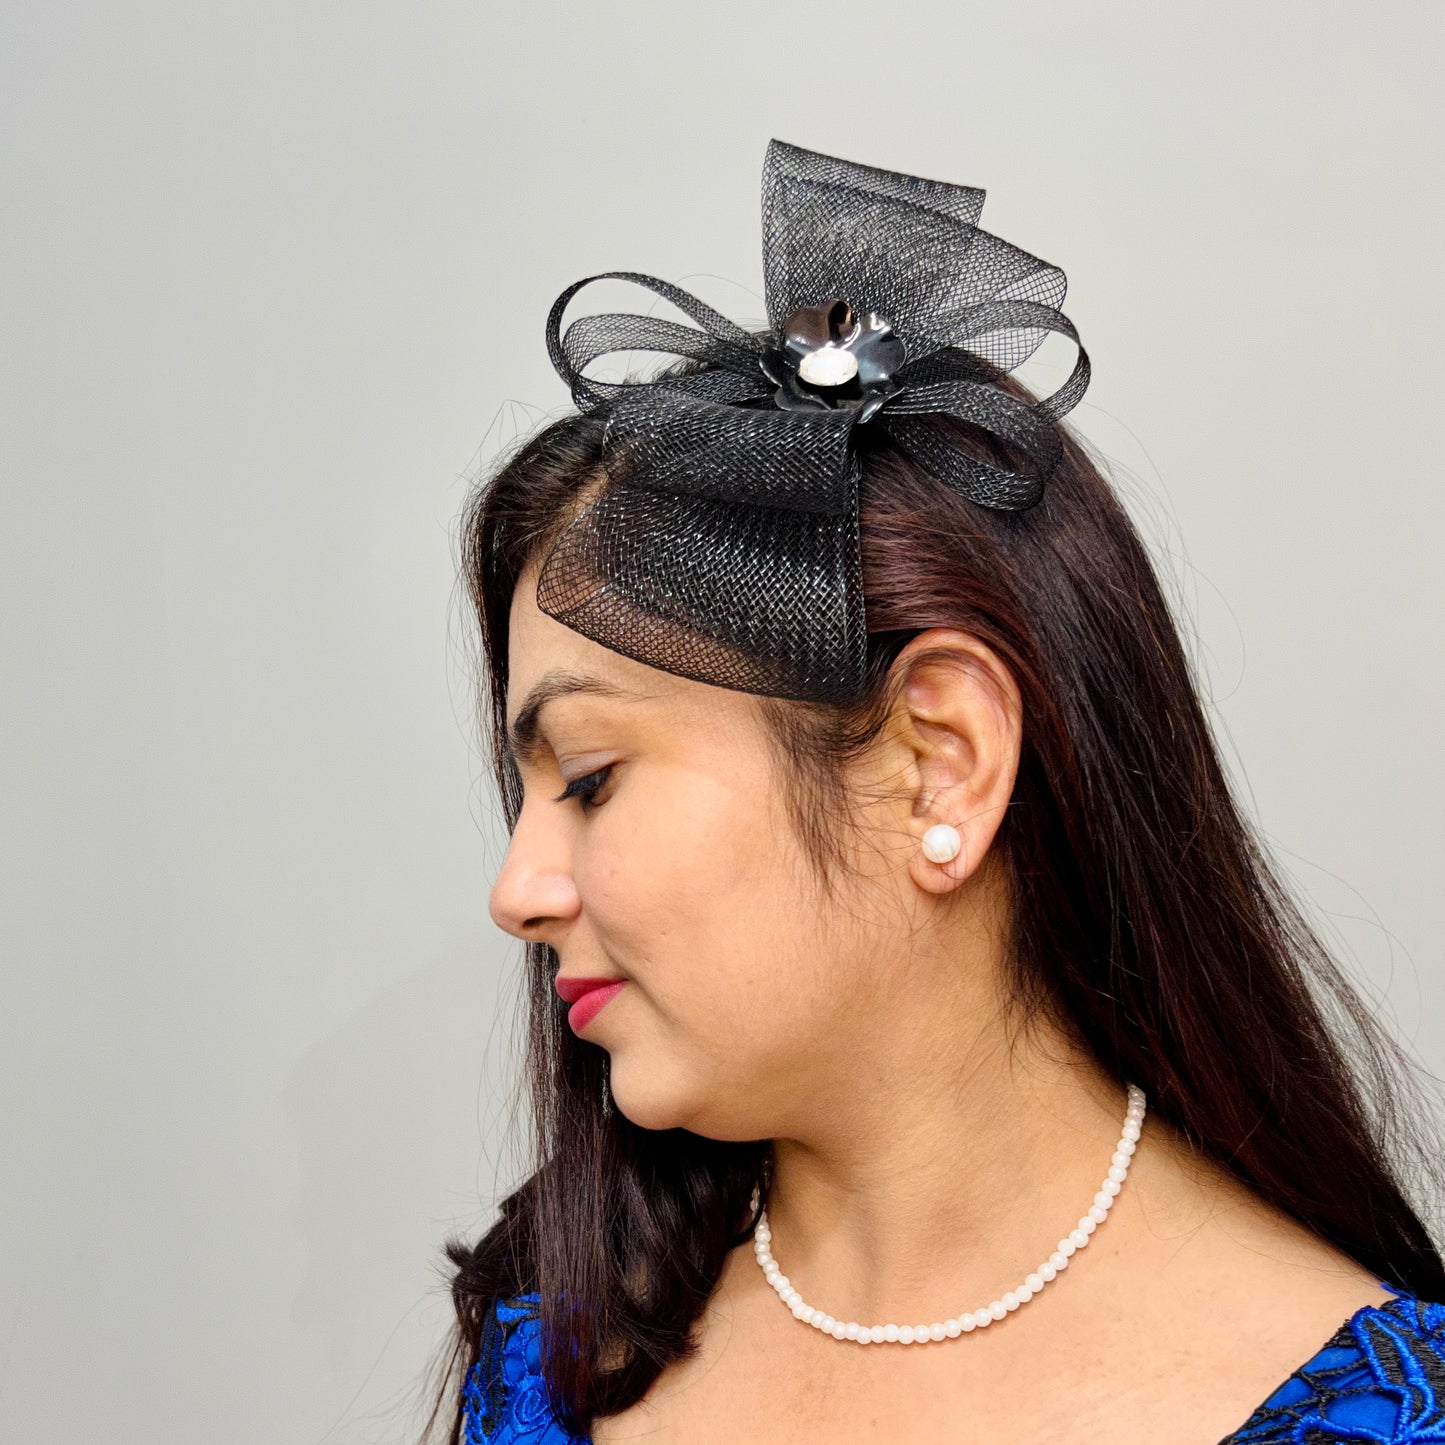 TWILIGHT MAGIC Fascinator Hat | Millinery Cocktail Party Headpiece